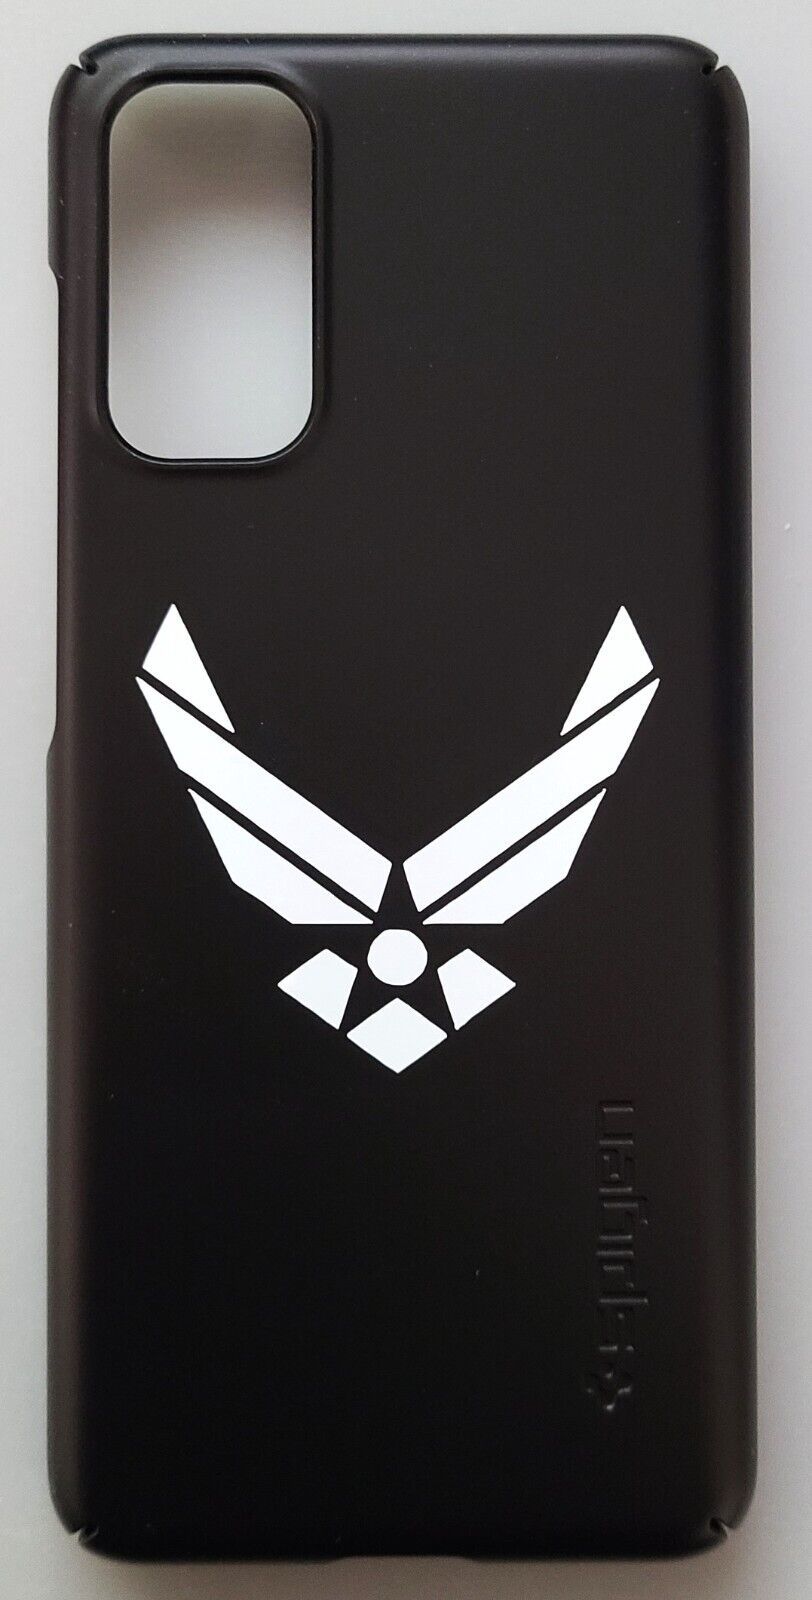 Primary image for (3x) U.S. Air Force Cell Phone Ipad Itouch Die-Cut Vinyl Decal Sticker